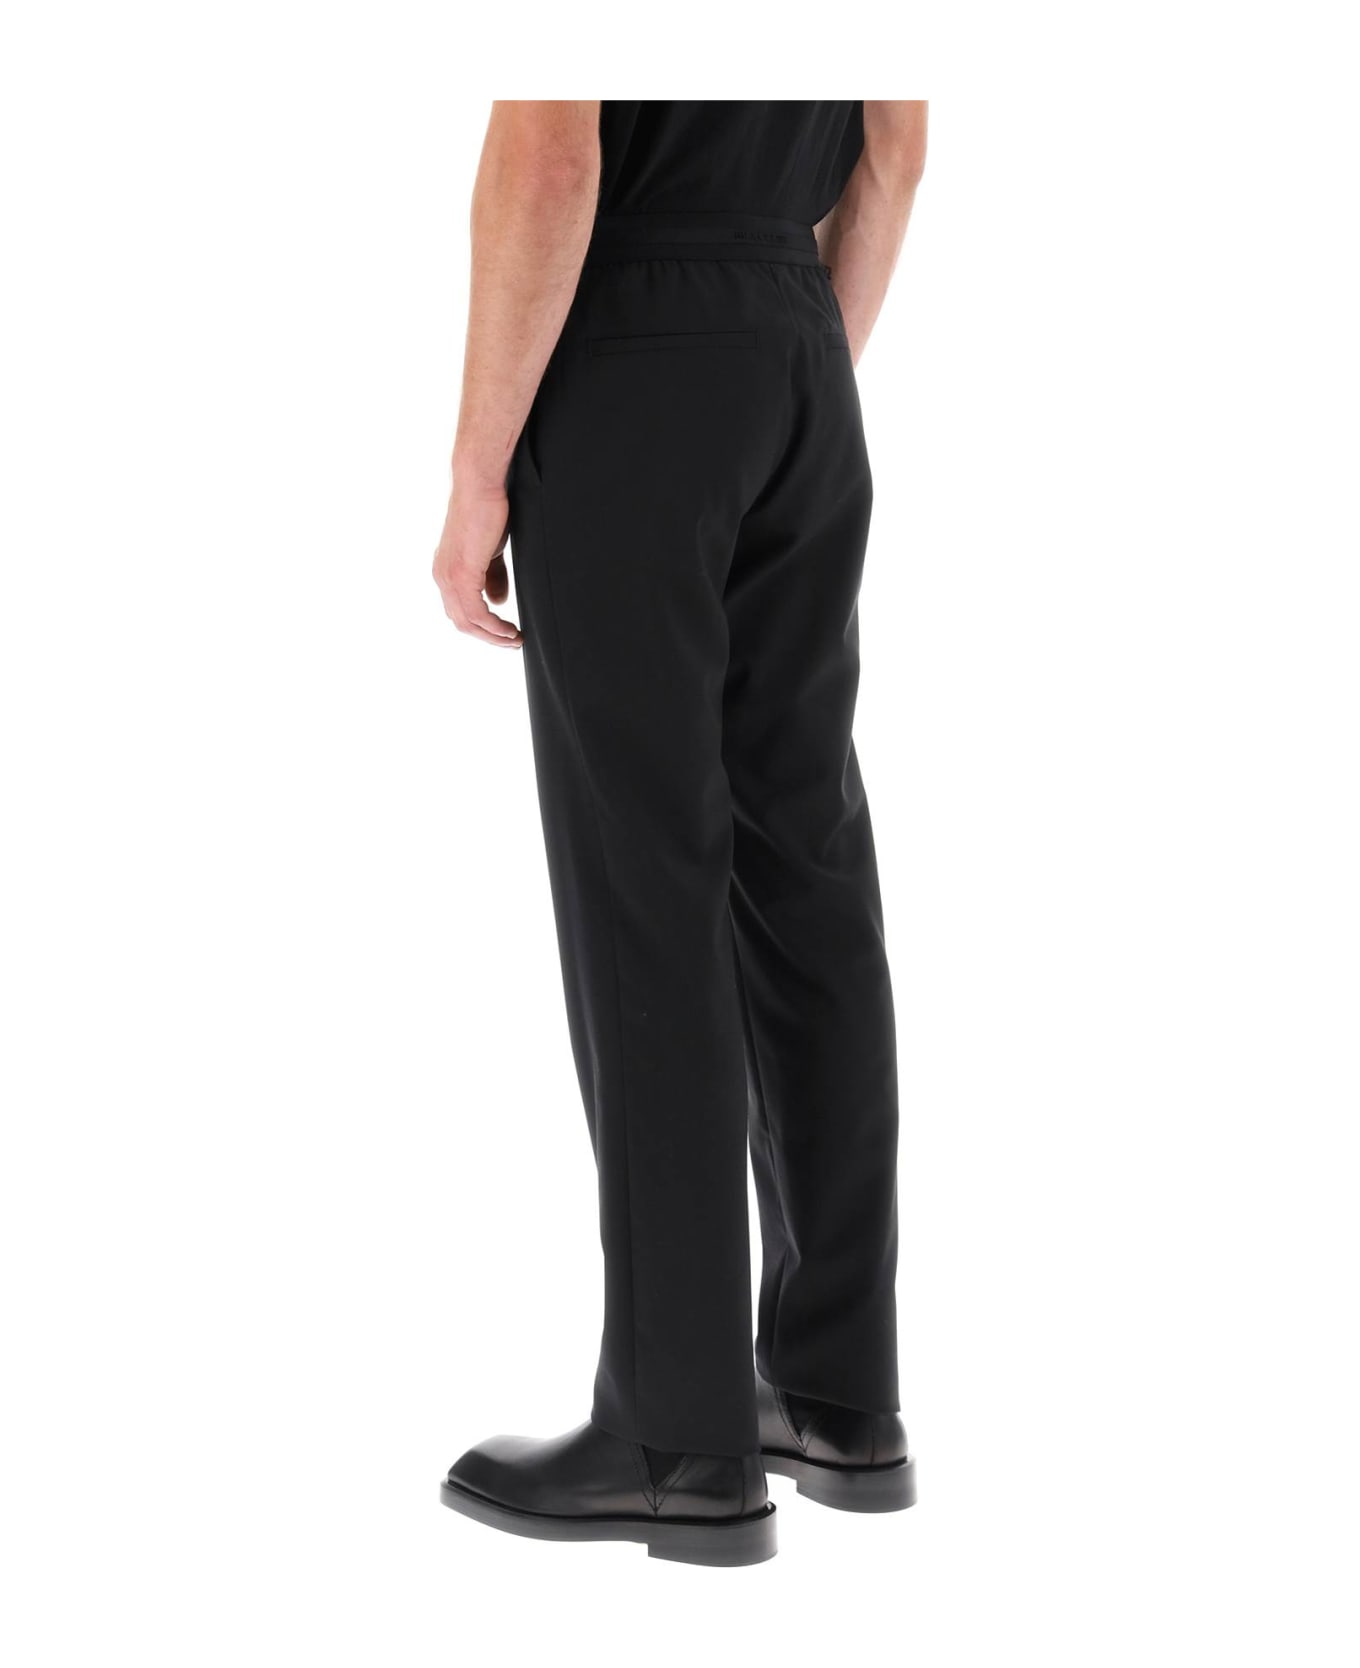 1017 ALYX 9SM Pants With Built-in Belt And Parachute Buckle - BLACK (Black) ボトムス